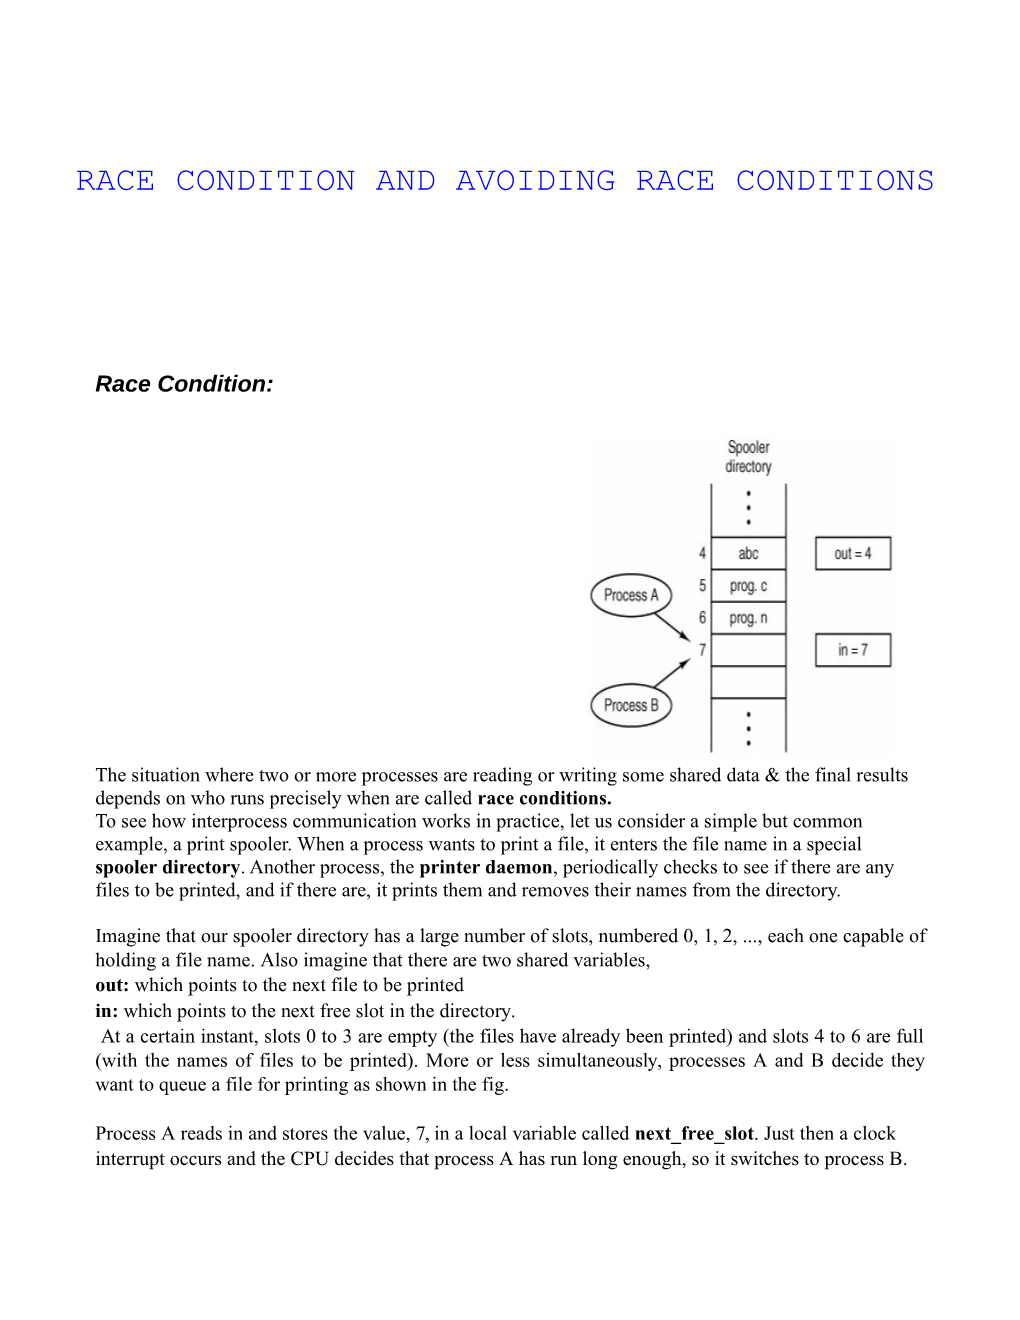 Race Condition and Avoiding Race Conditions